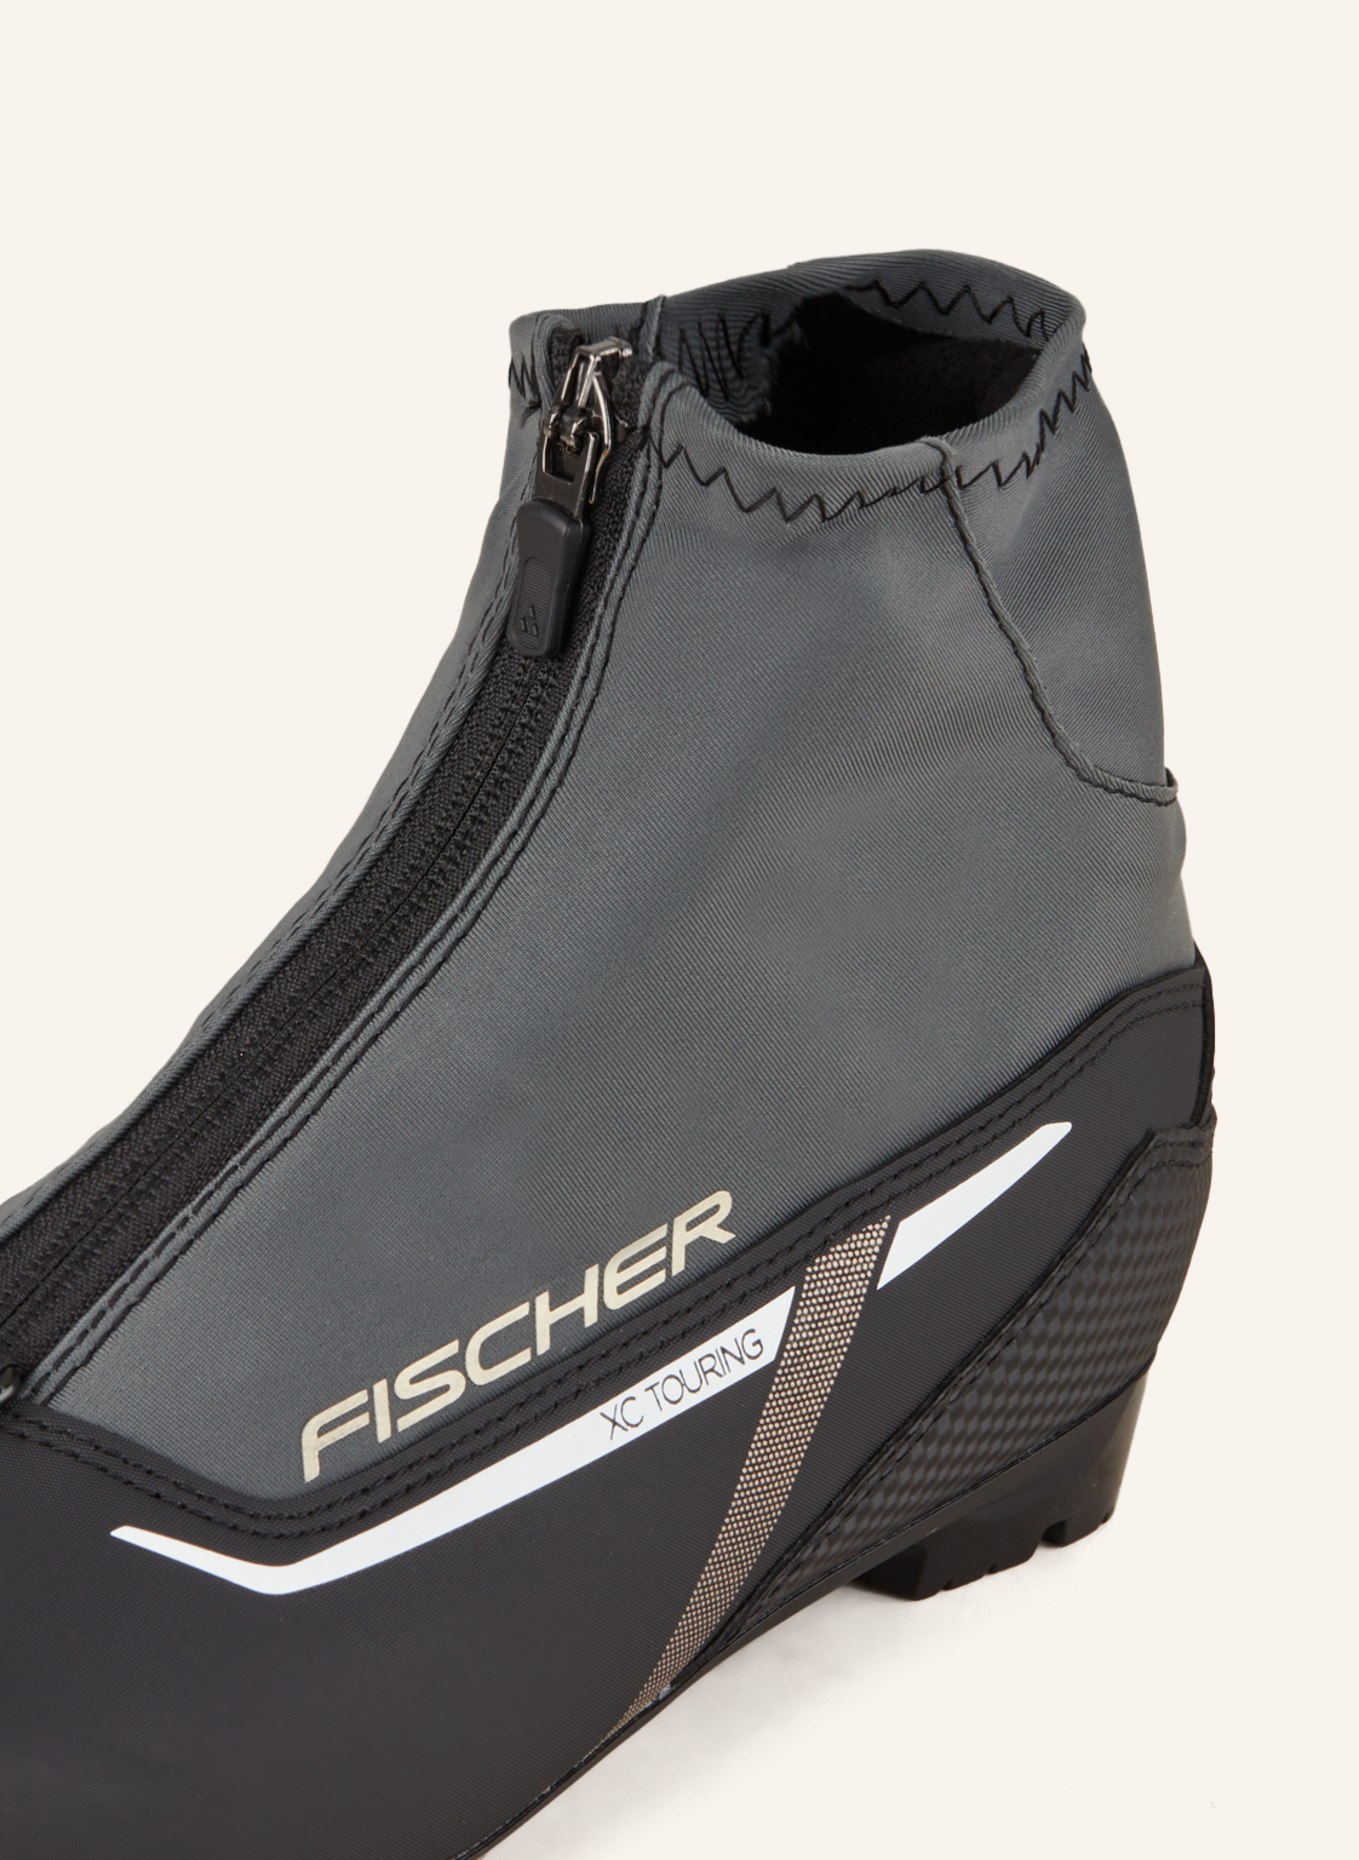 FISCHER Cross-country ski boots XC TOURING WS, Color: BLACK/ DARK GRAY (Image 5)